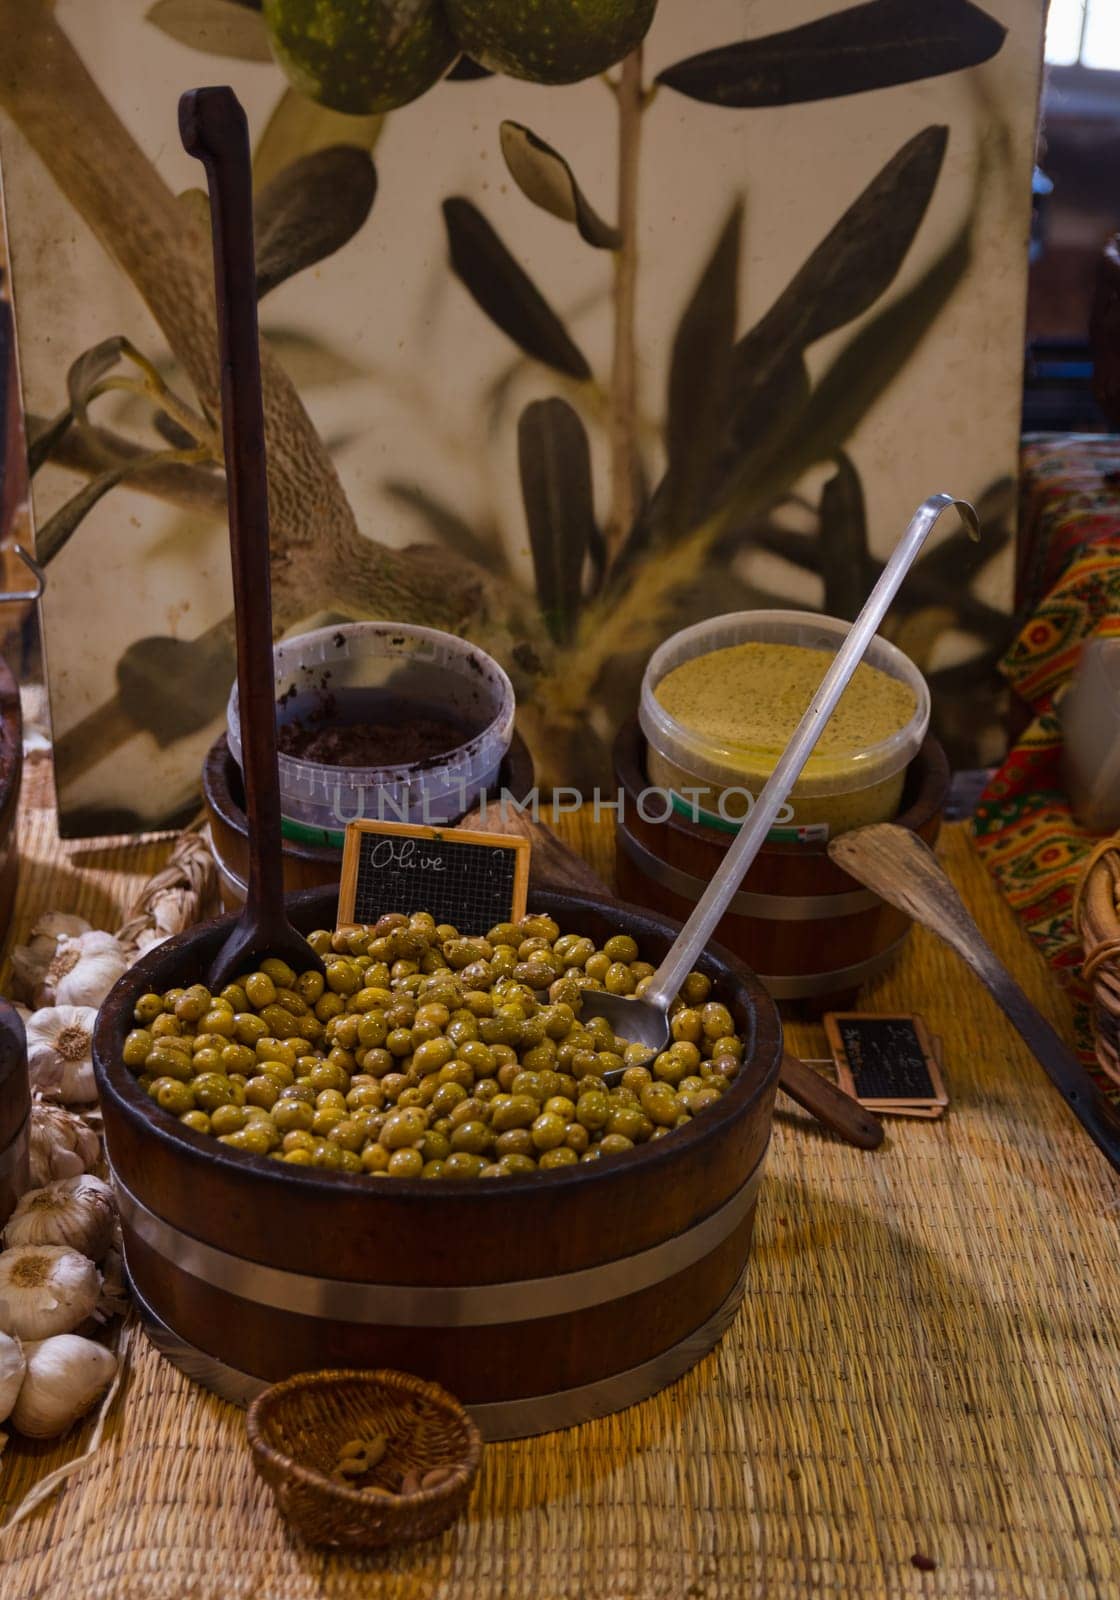 a bowl of olives on the market in France by compuinfoto